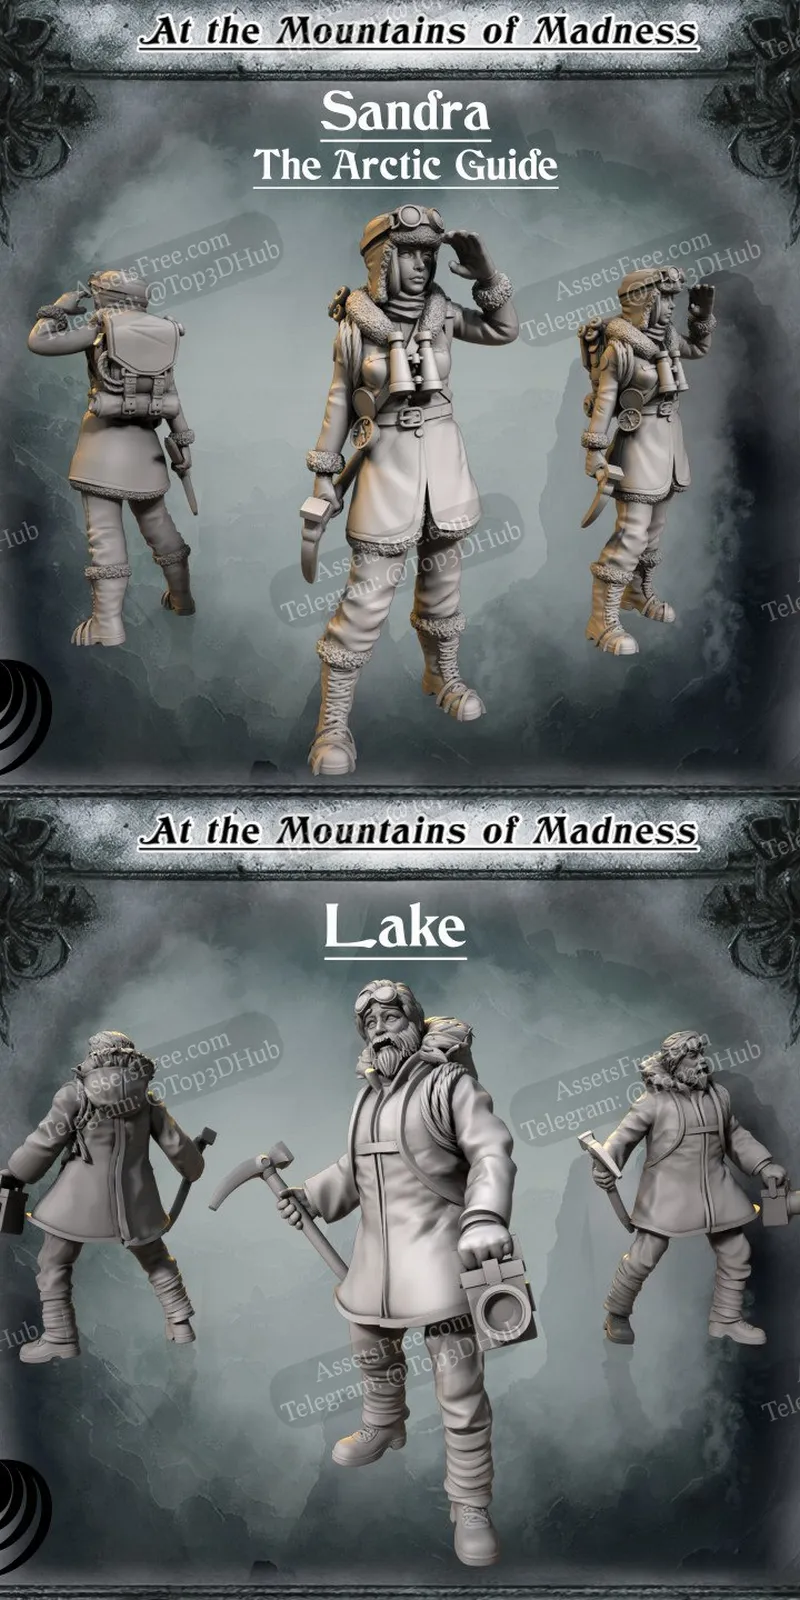 Sandra the Arctic Guide and Lake - At the Mountains of Madness